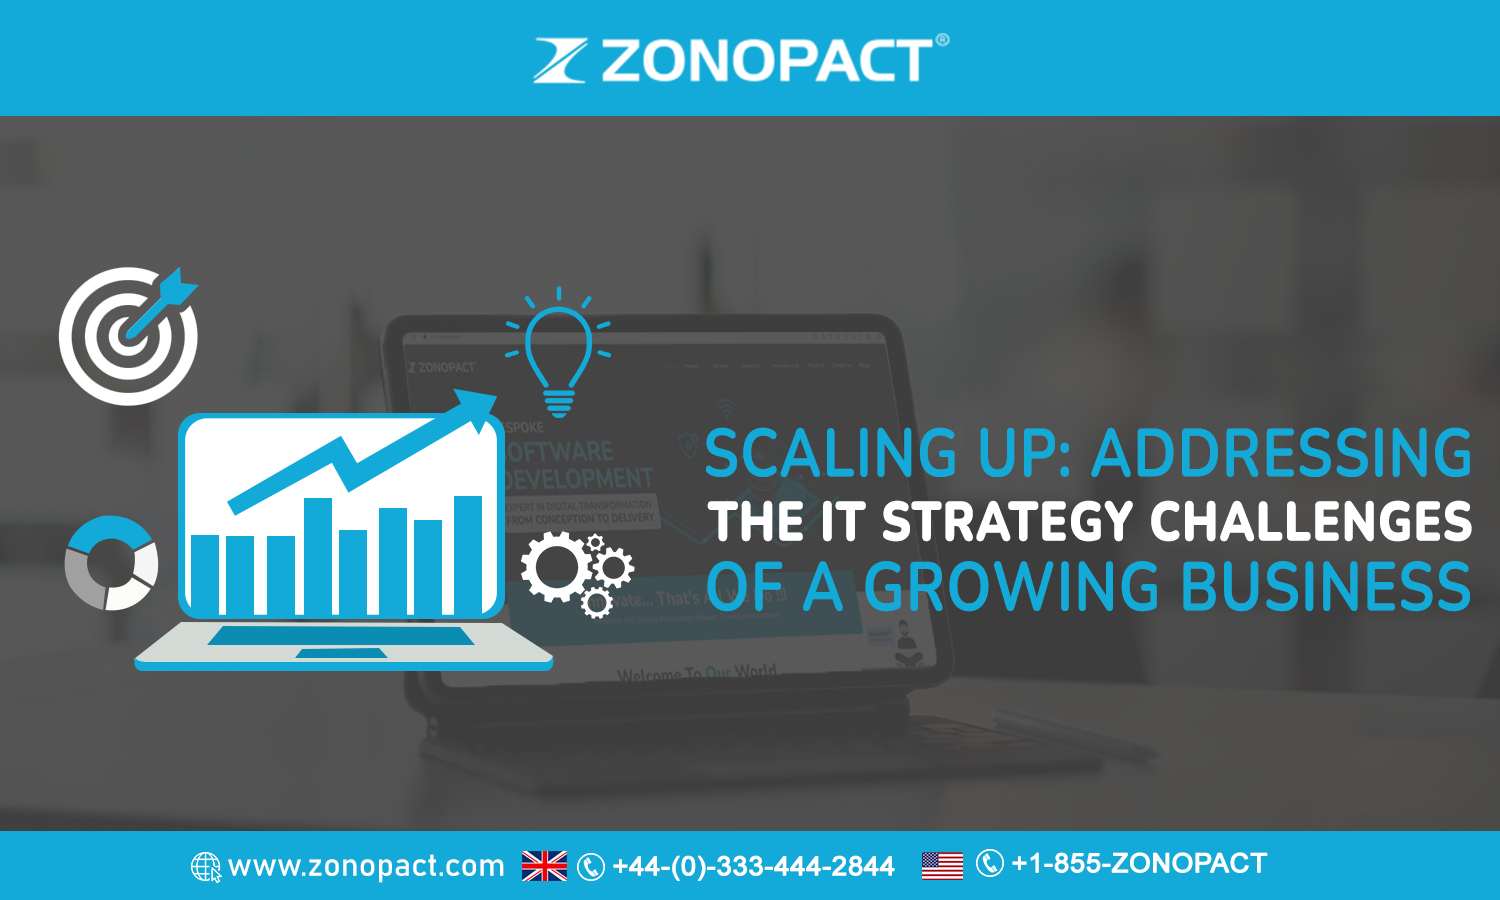 Scaling Up Addressing the IT Strategy Challenges of a Growing Business (2) (1)